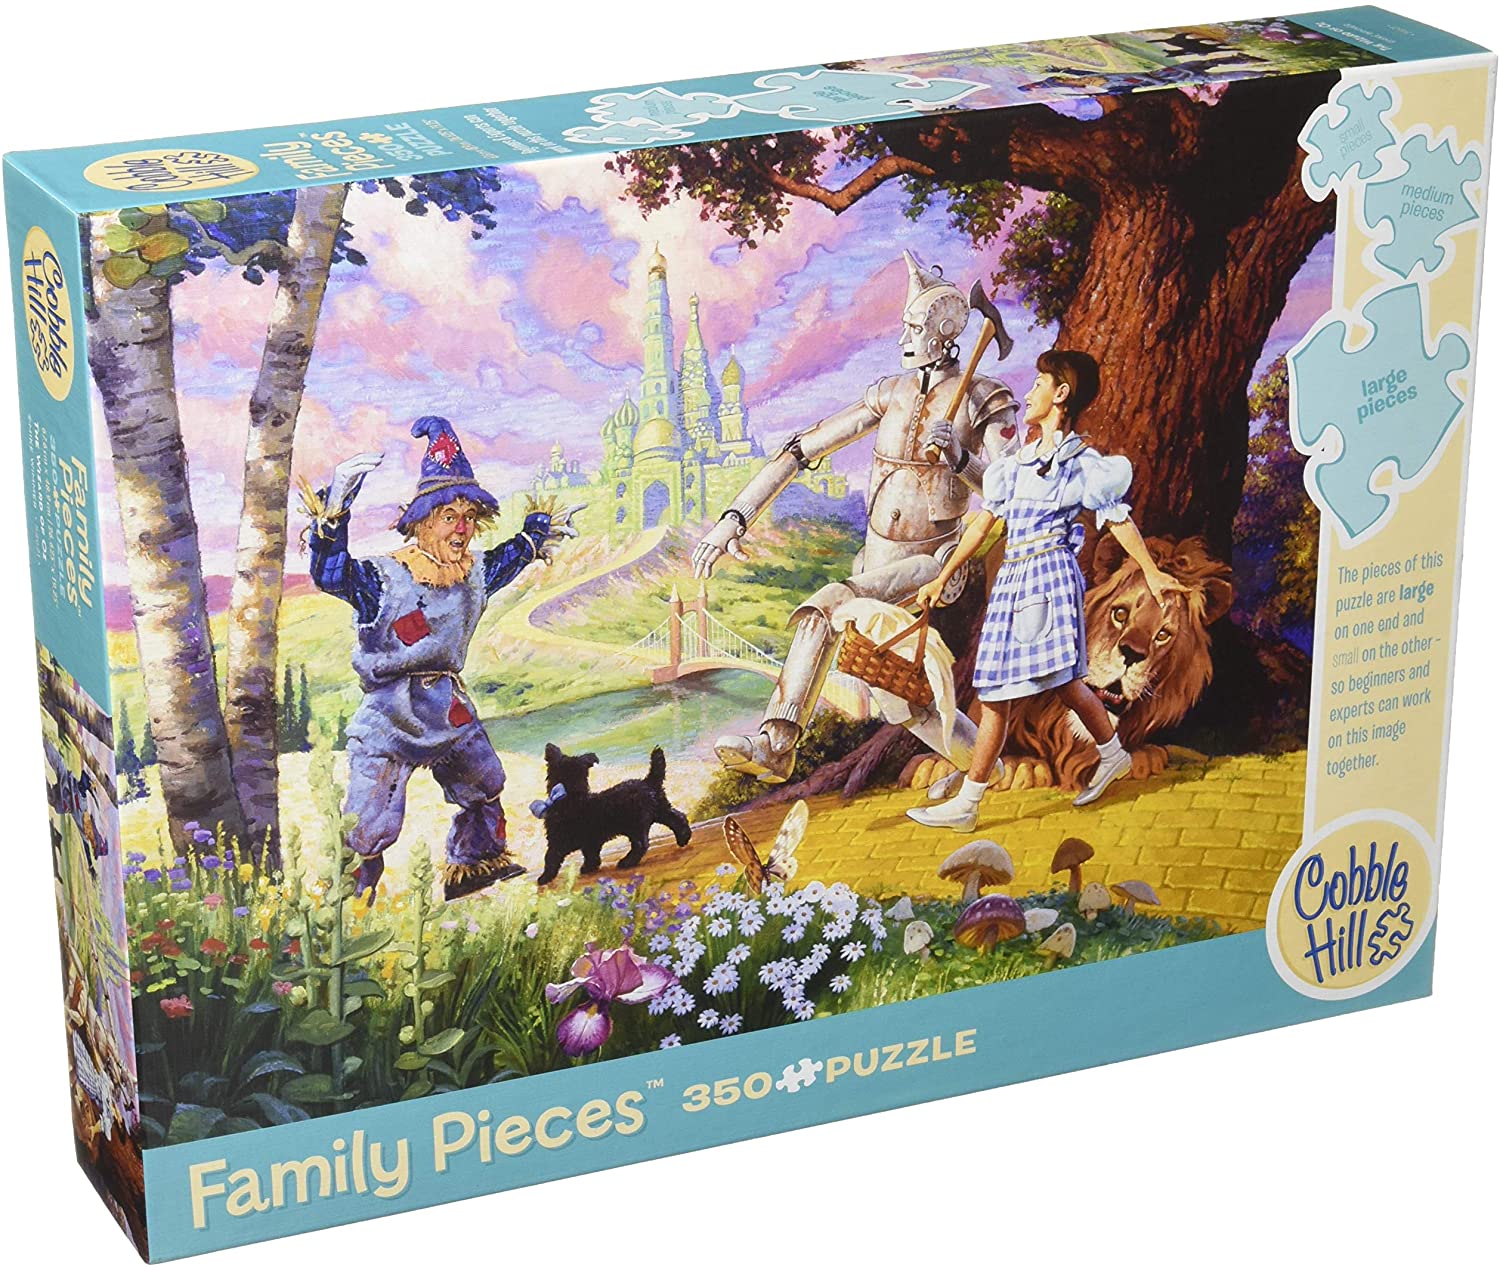 The Wizard of Oz Puzzle - 350 piece